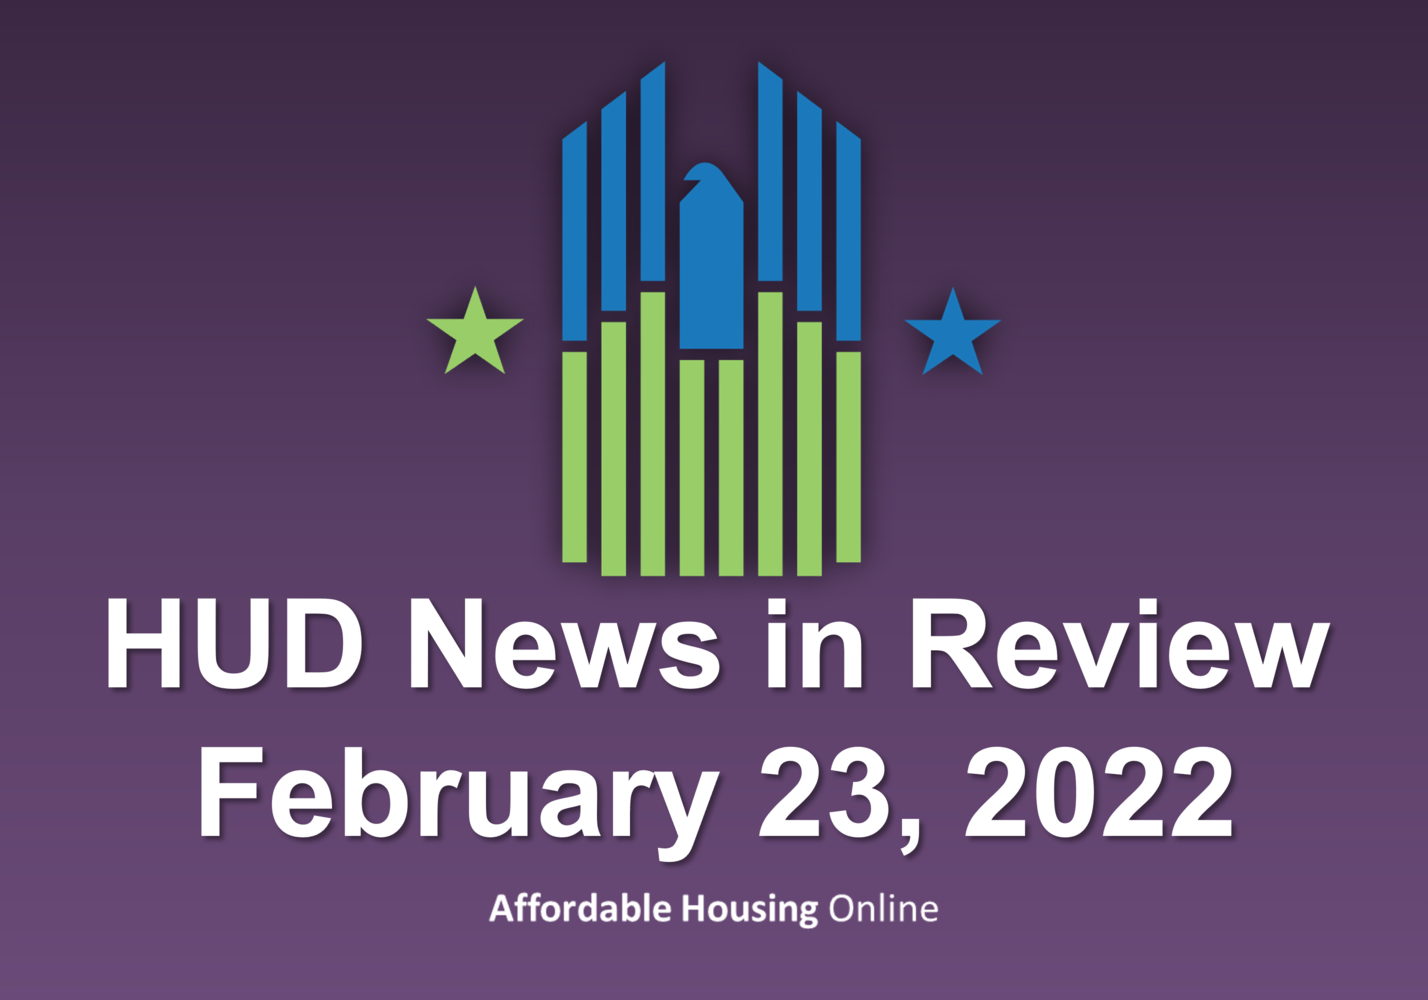 HUD News in Review: February 23, 2022